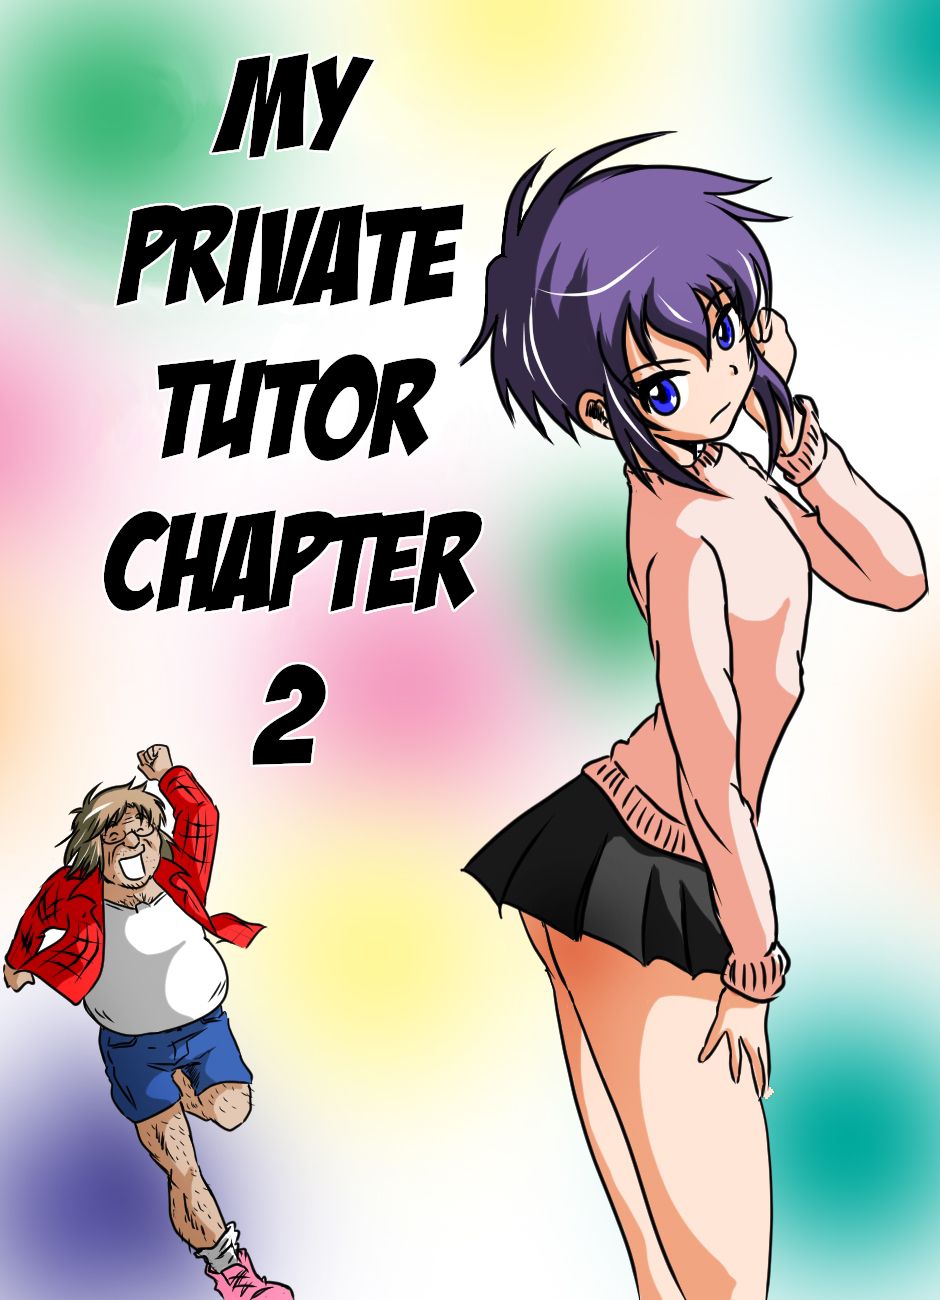 [Ka-iN] Tutor Particular (My Private Tutor) Chapter 1 - 3 [English] (in progress) 39